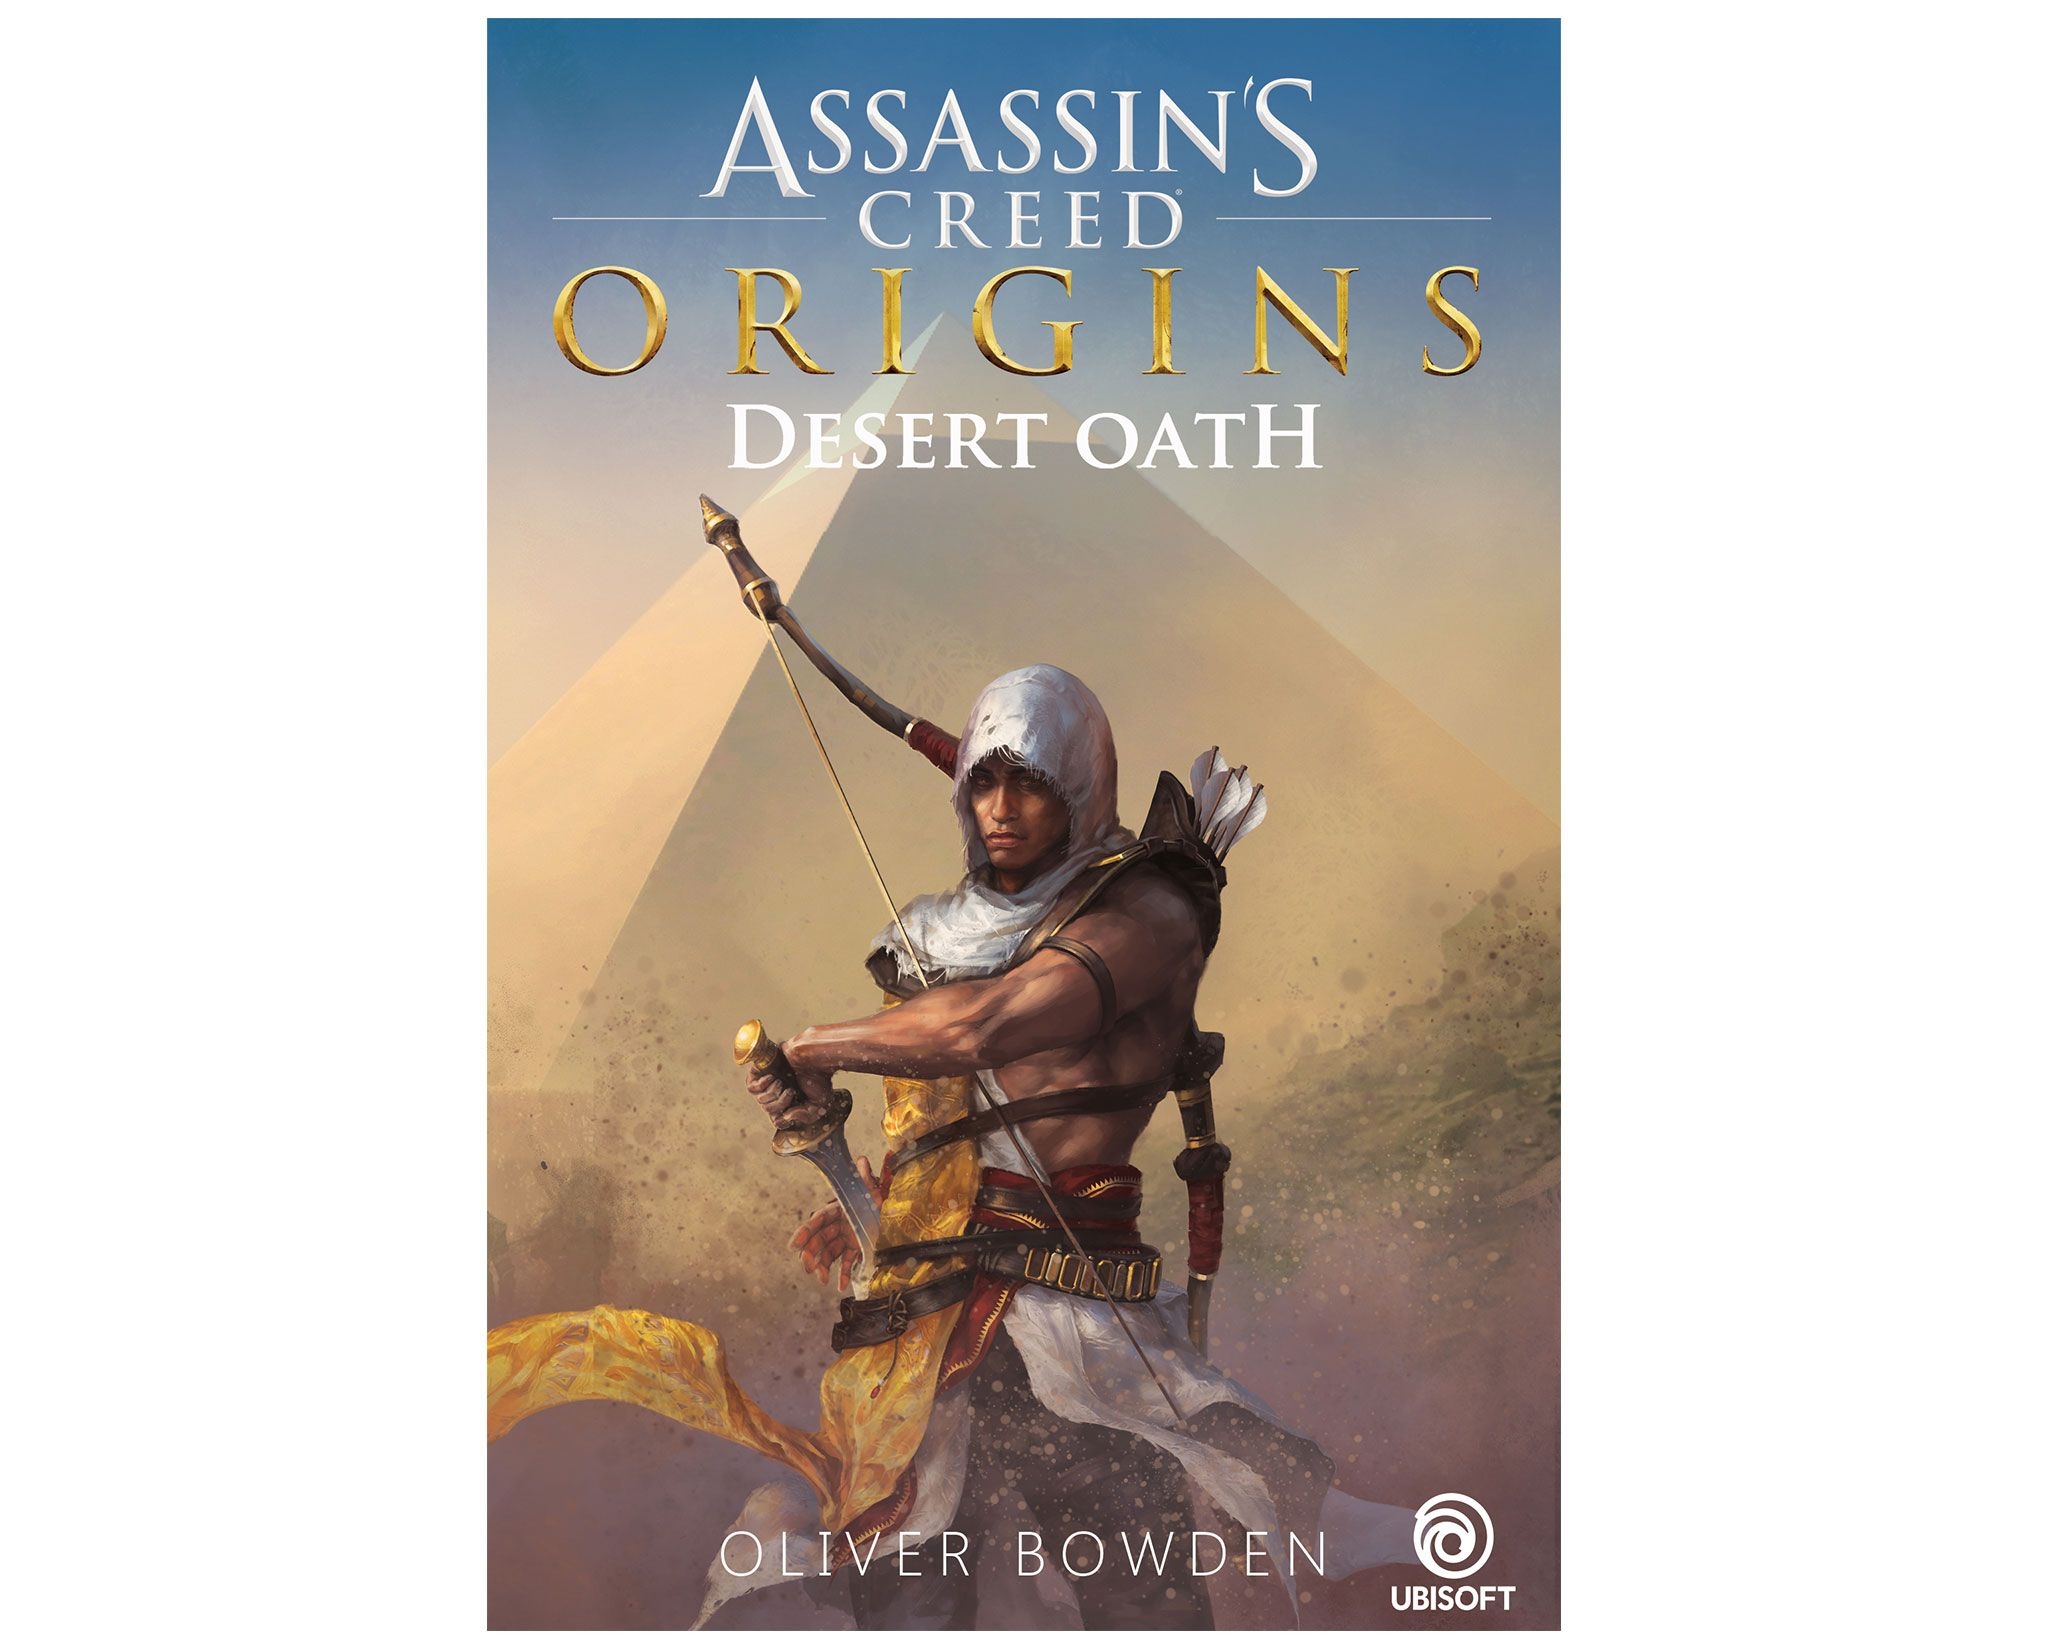 Assassin’s Creed Origins: Desert Oath Available Now | DeviceDaily.com